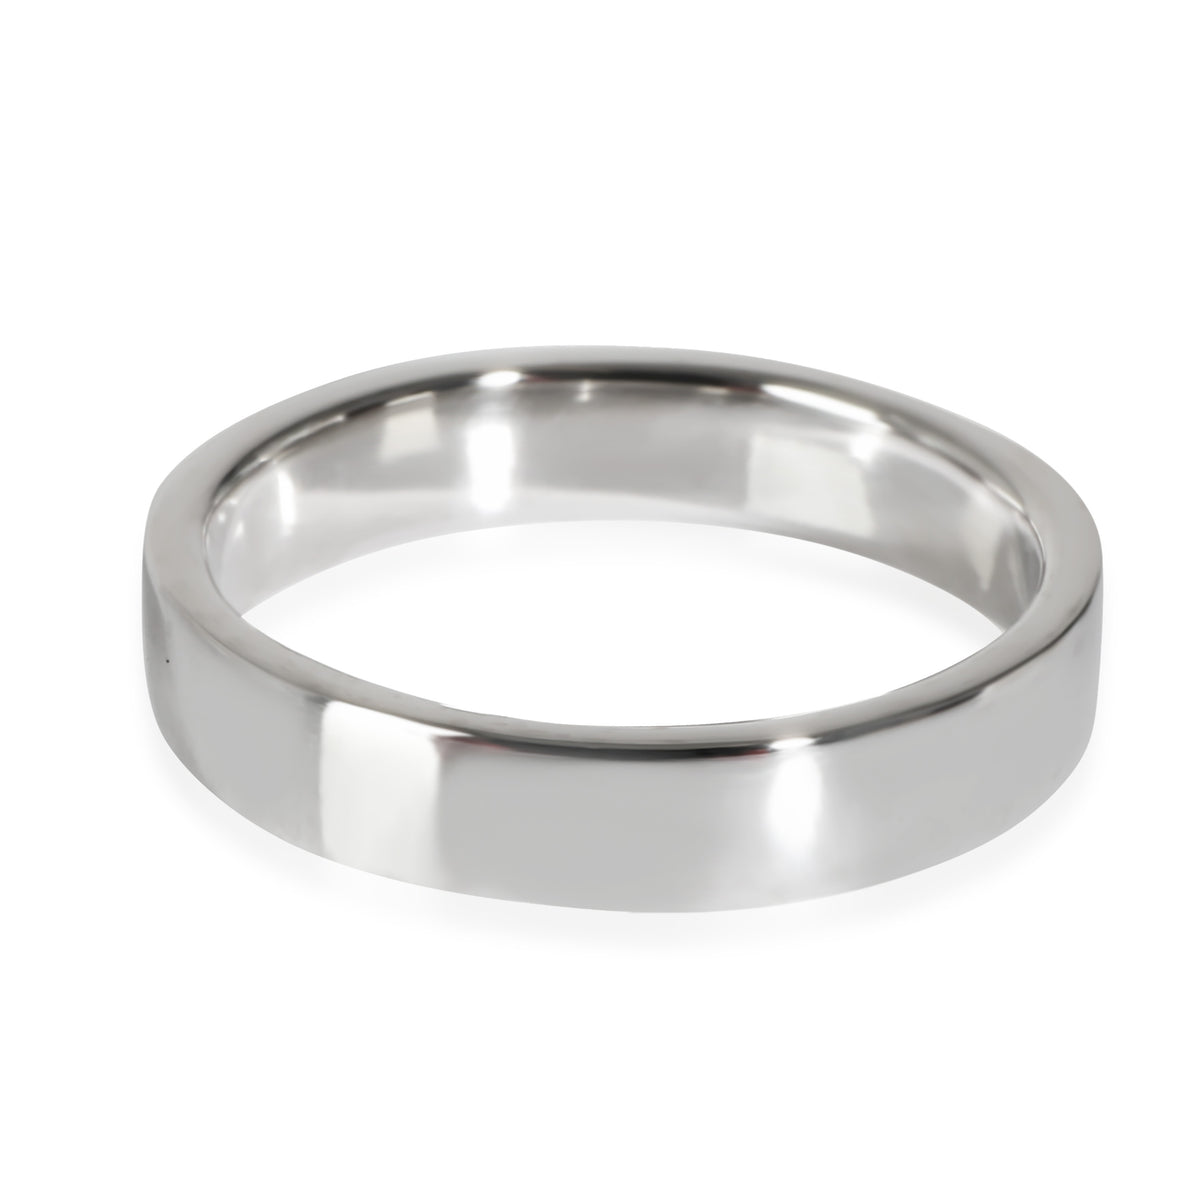 Band Ring in Platinum, 4mm